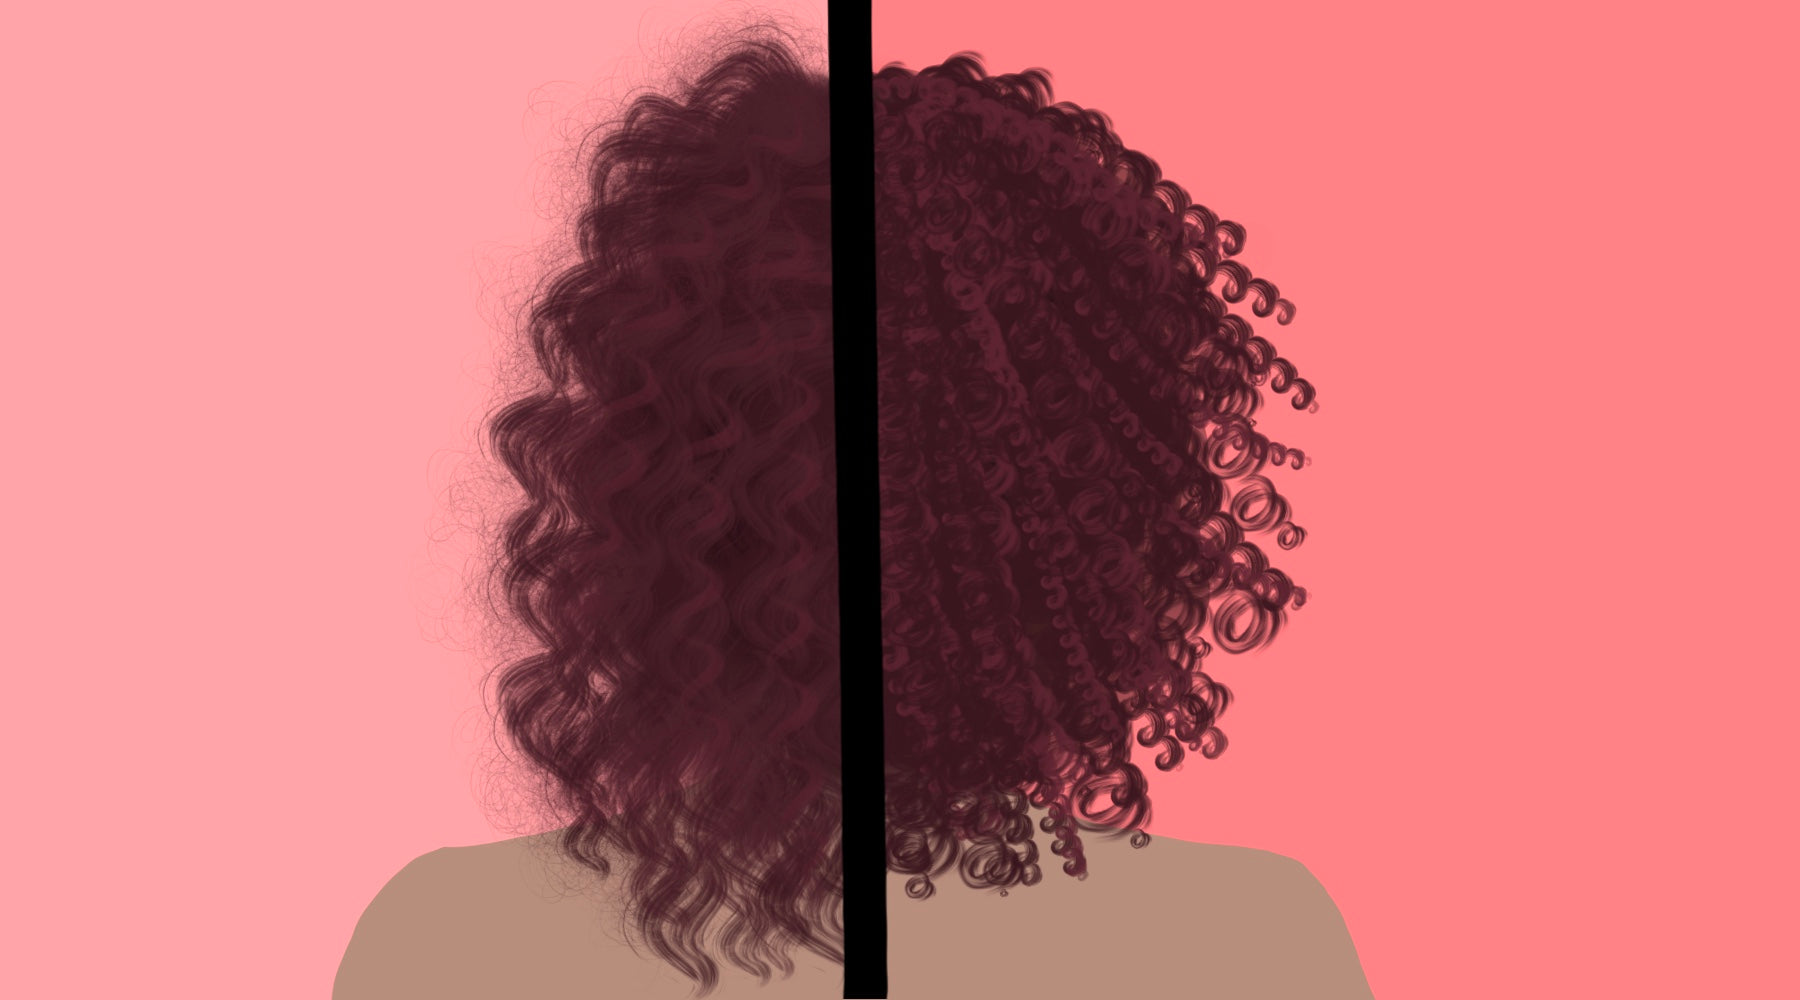 How to Transition From Damaged Hair to Natural Curly Hair